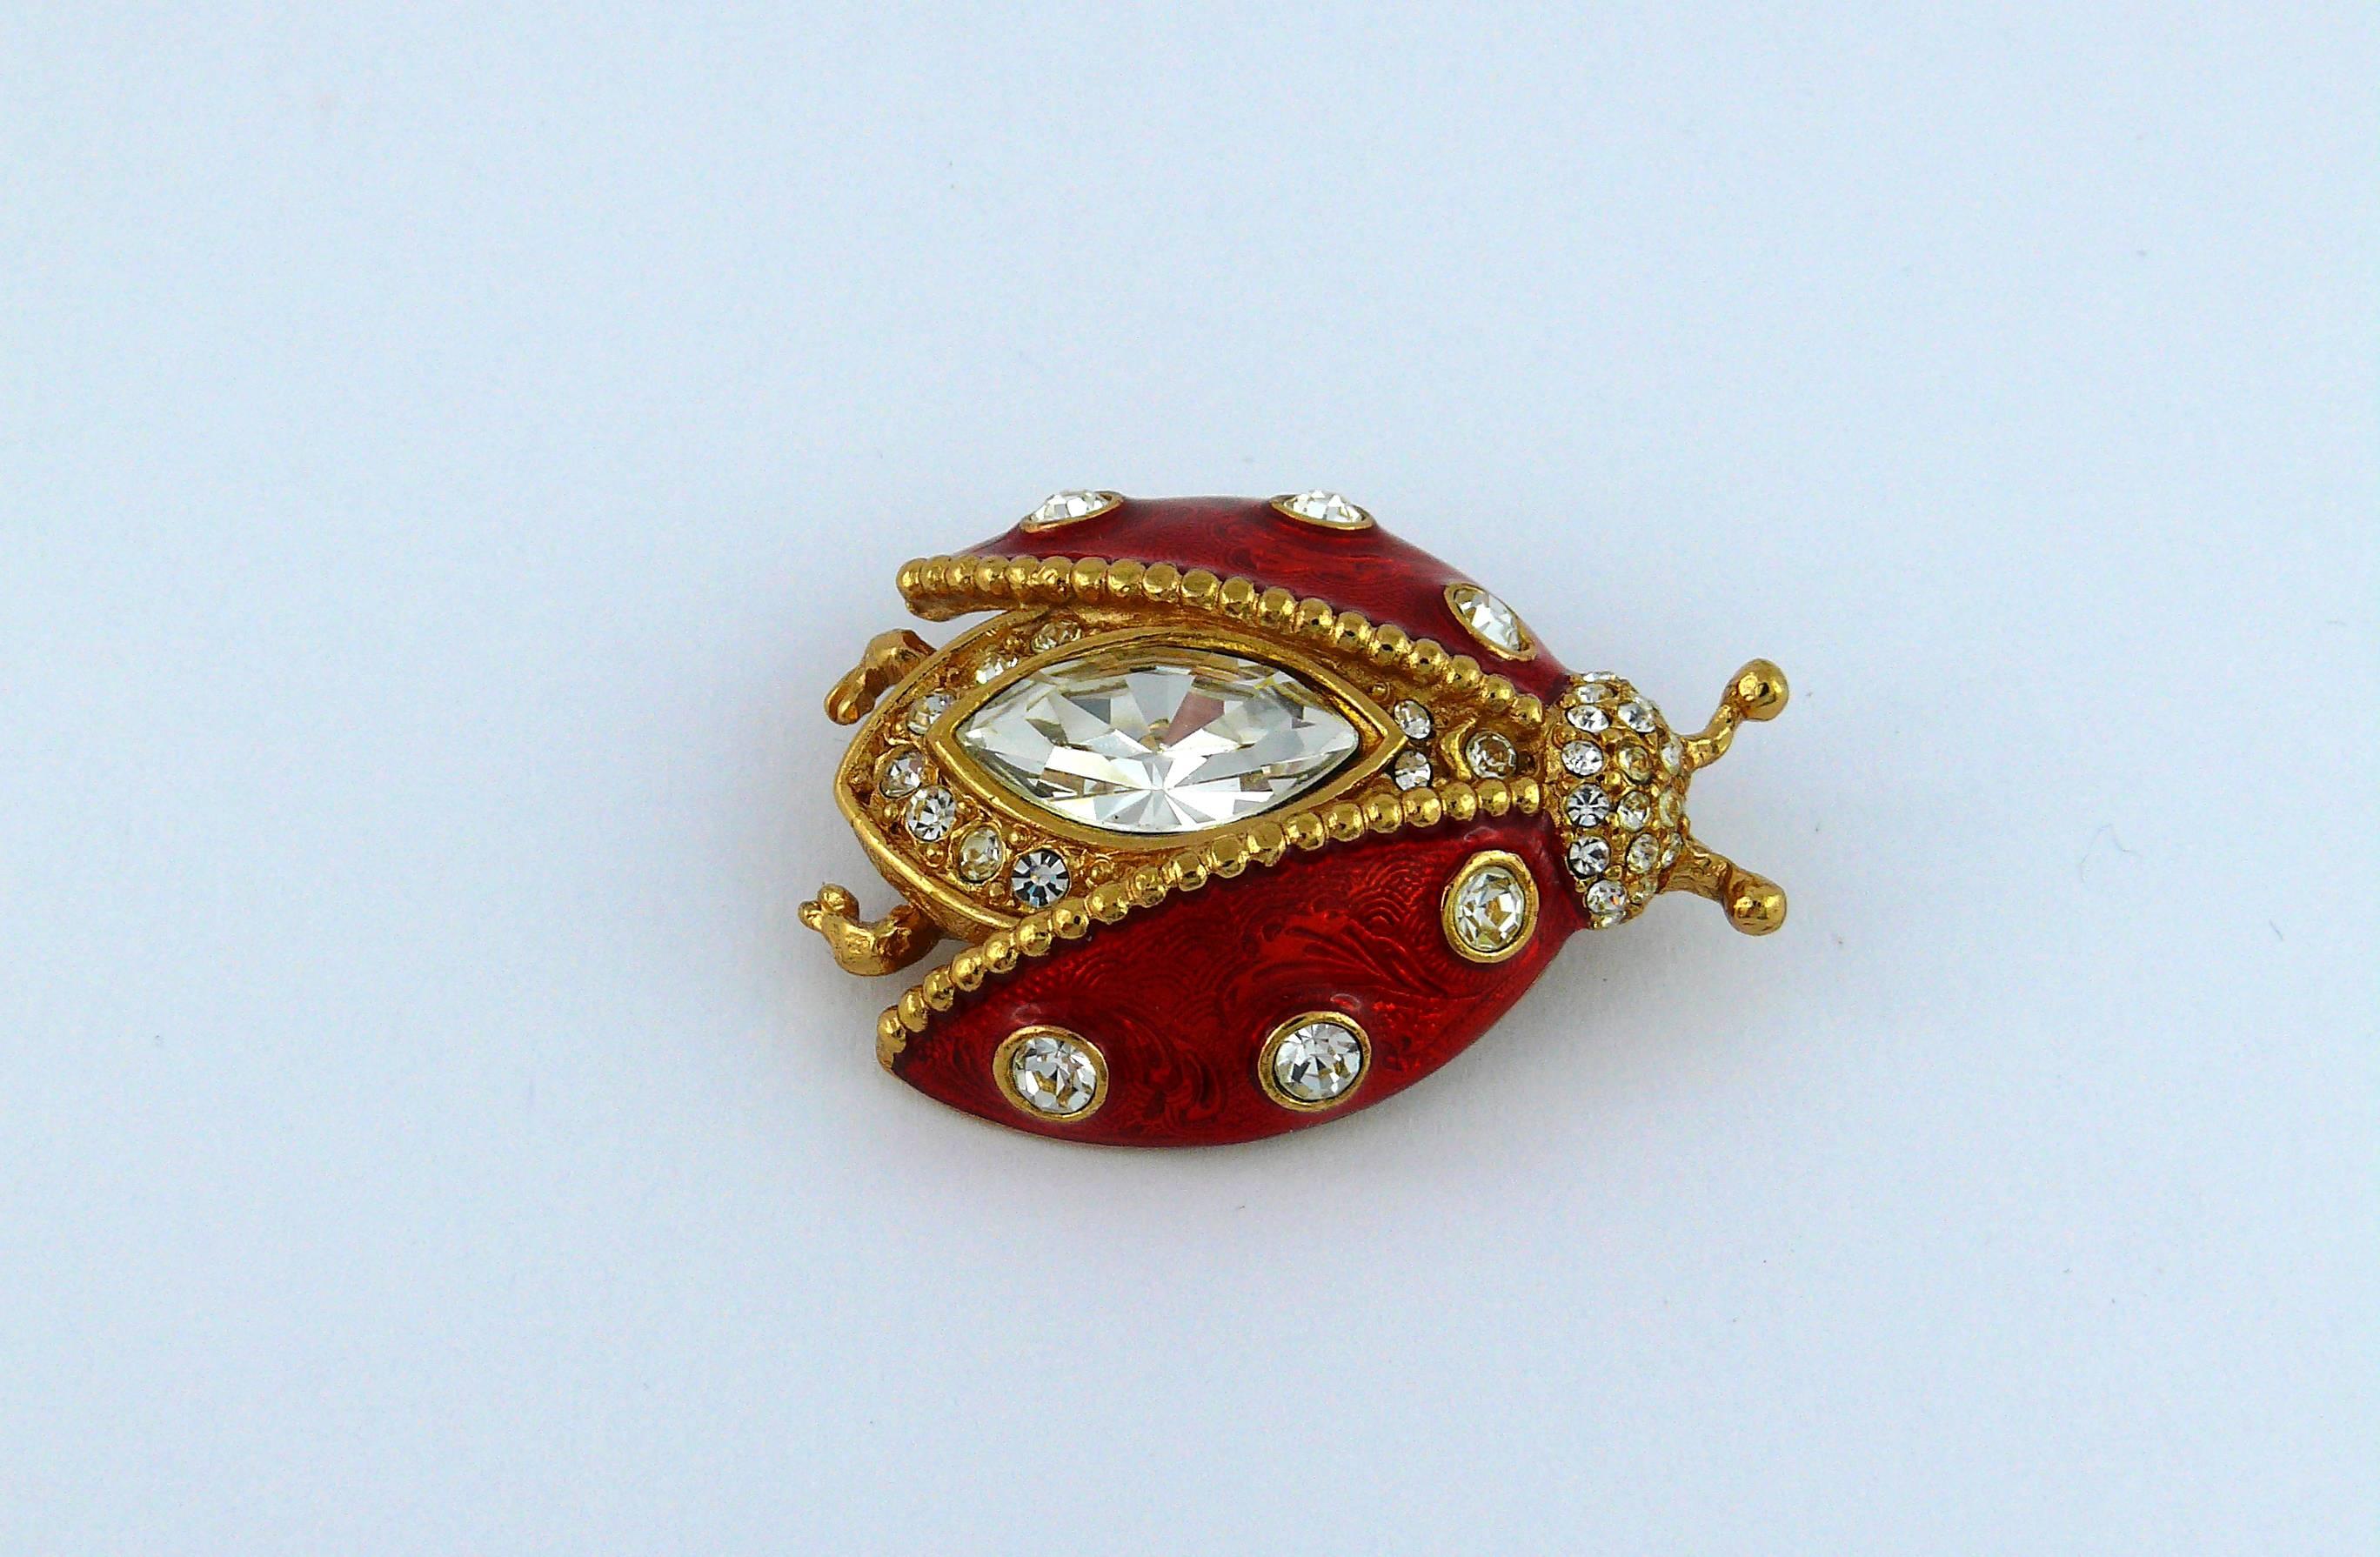 CHRISTIAN DIOR Boutique vintage rare jeweled ladybug brooch.

Enameled gold tone metal, embellished with white rhinestones.

Marked CHRISTIAN DIOR Boutique.

Note
As a buyer, you are fully responsible for customs duties, other local taxes and